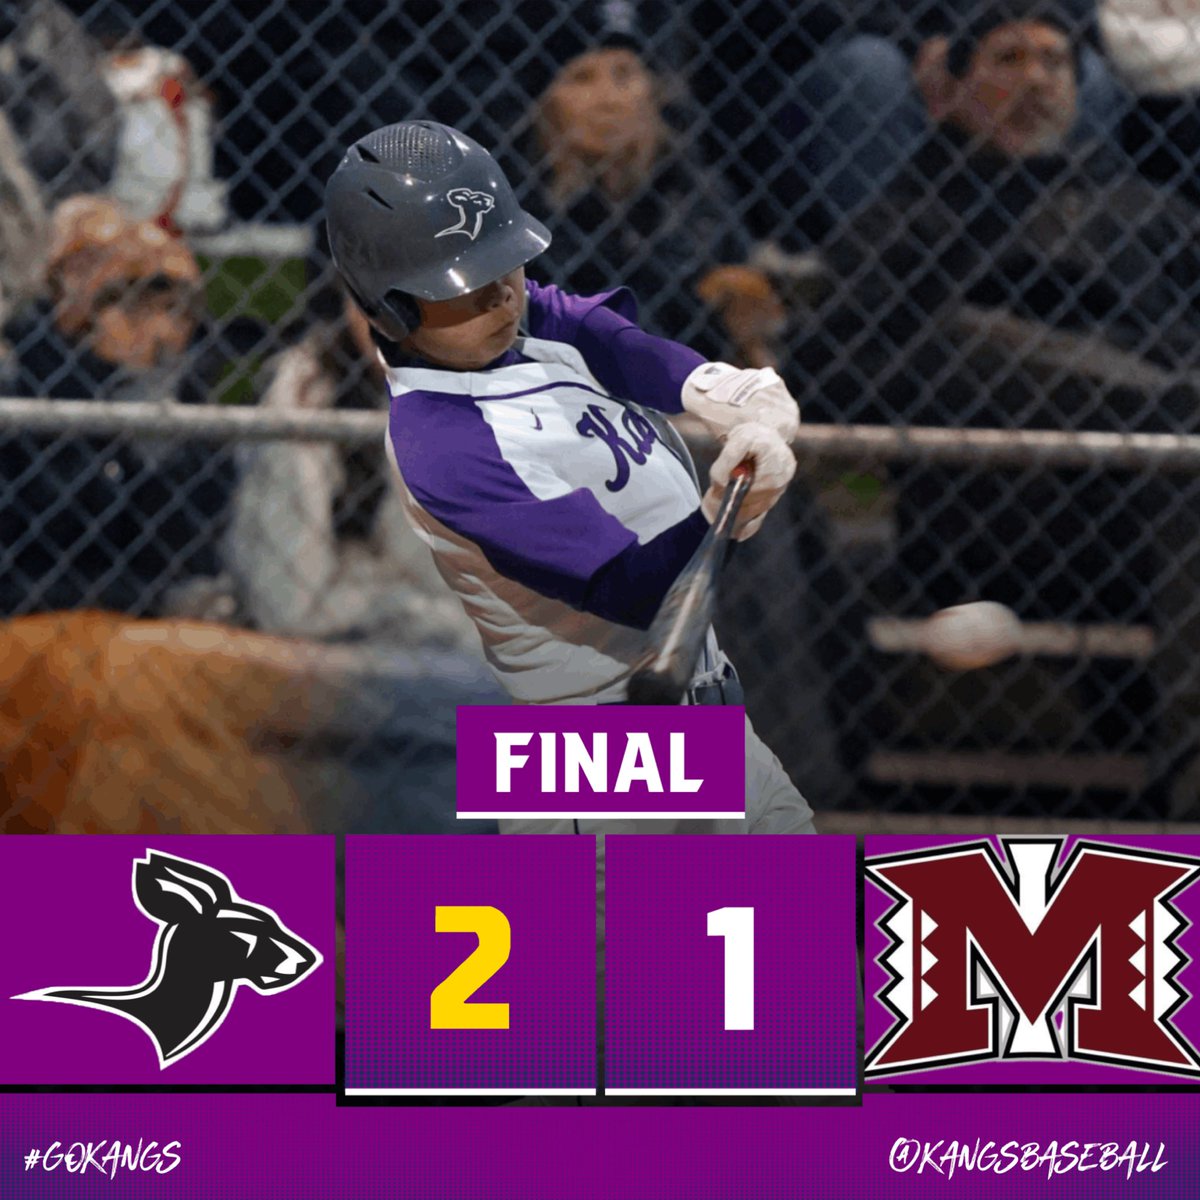 Another epic showdown between KingCo 3A powers went the way of the LW, as they downed Mercer Island, 2-1. ‘25 @ShaneJohnson_1 allowed 1 earned over 6, striking out 9 to improve to 3-0. ‘25 @BradyOCain12 pitched a scoreless final frame for his school record 3rd save of the season